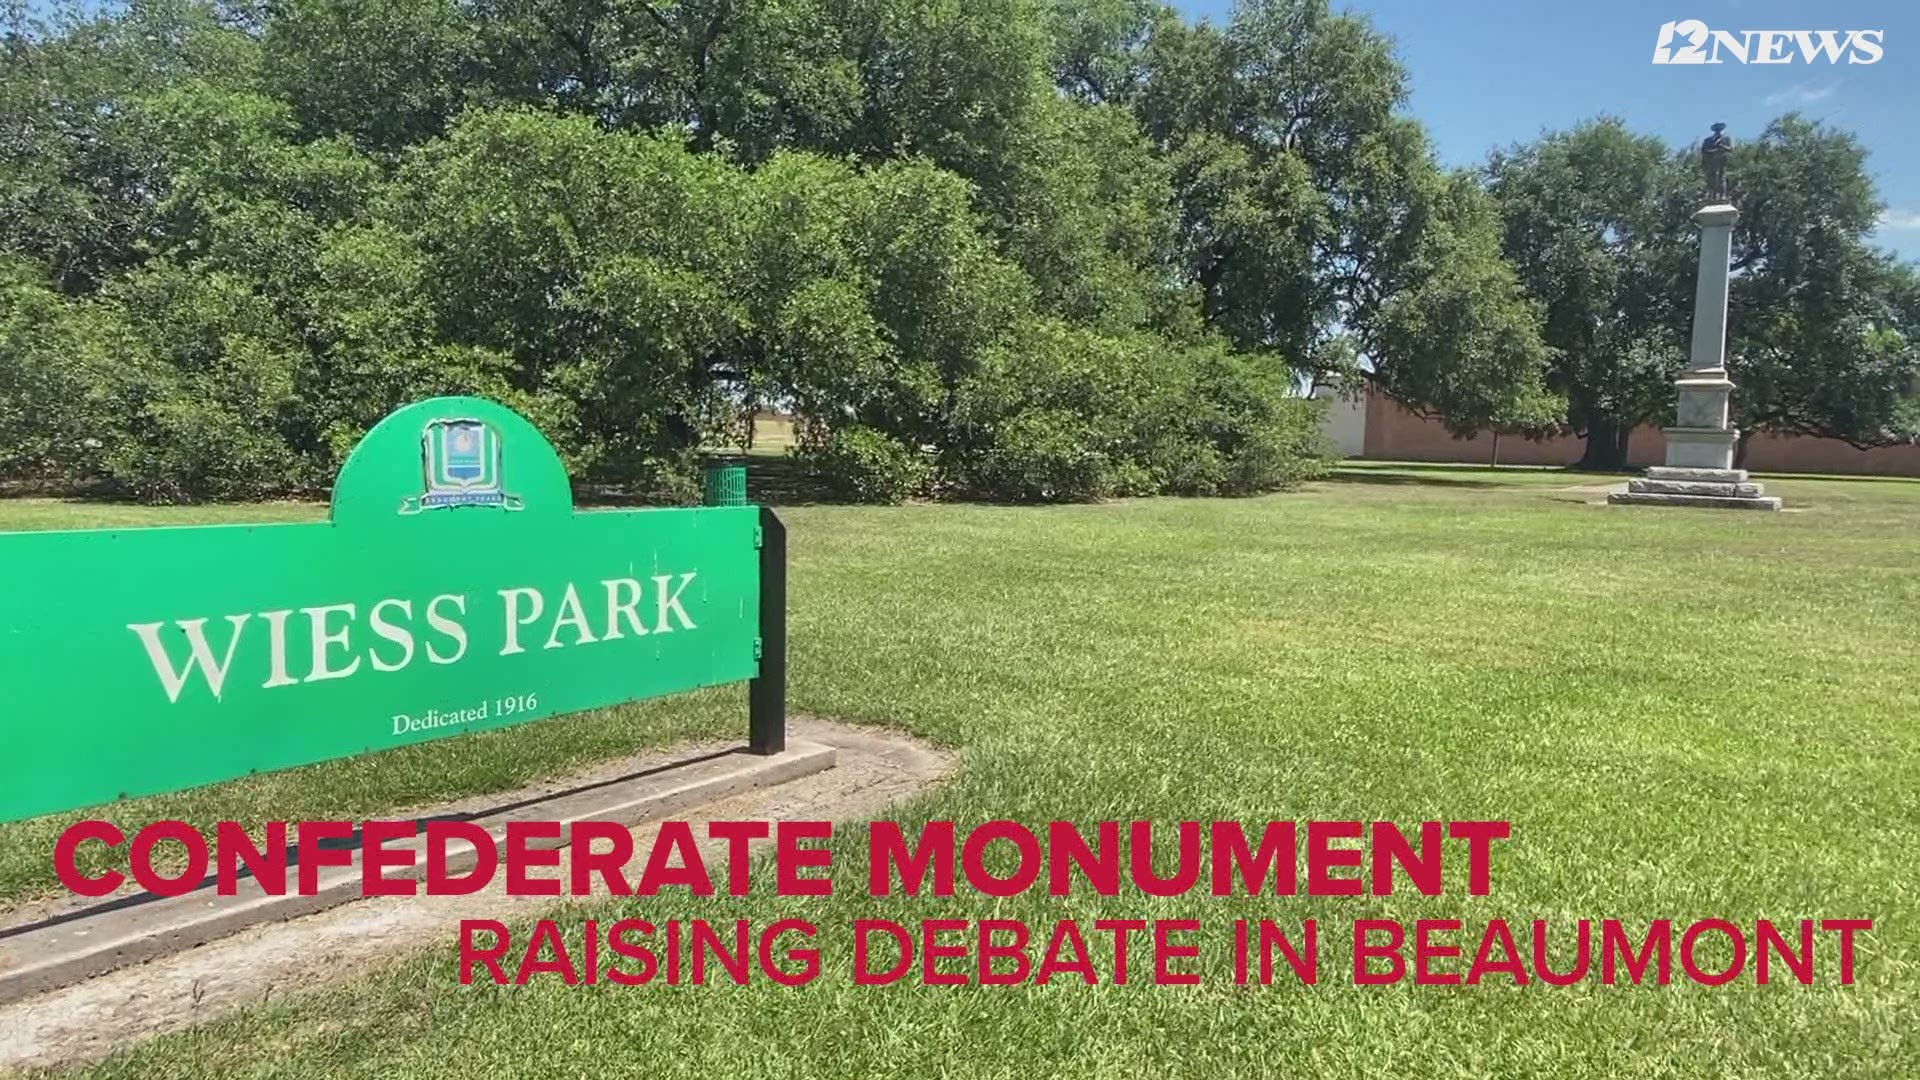 Beaumont City Council is set to consider the removal of a Confederate statue that has kept watch over a downtown Beaumont park since 1912.